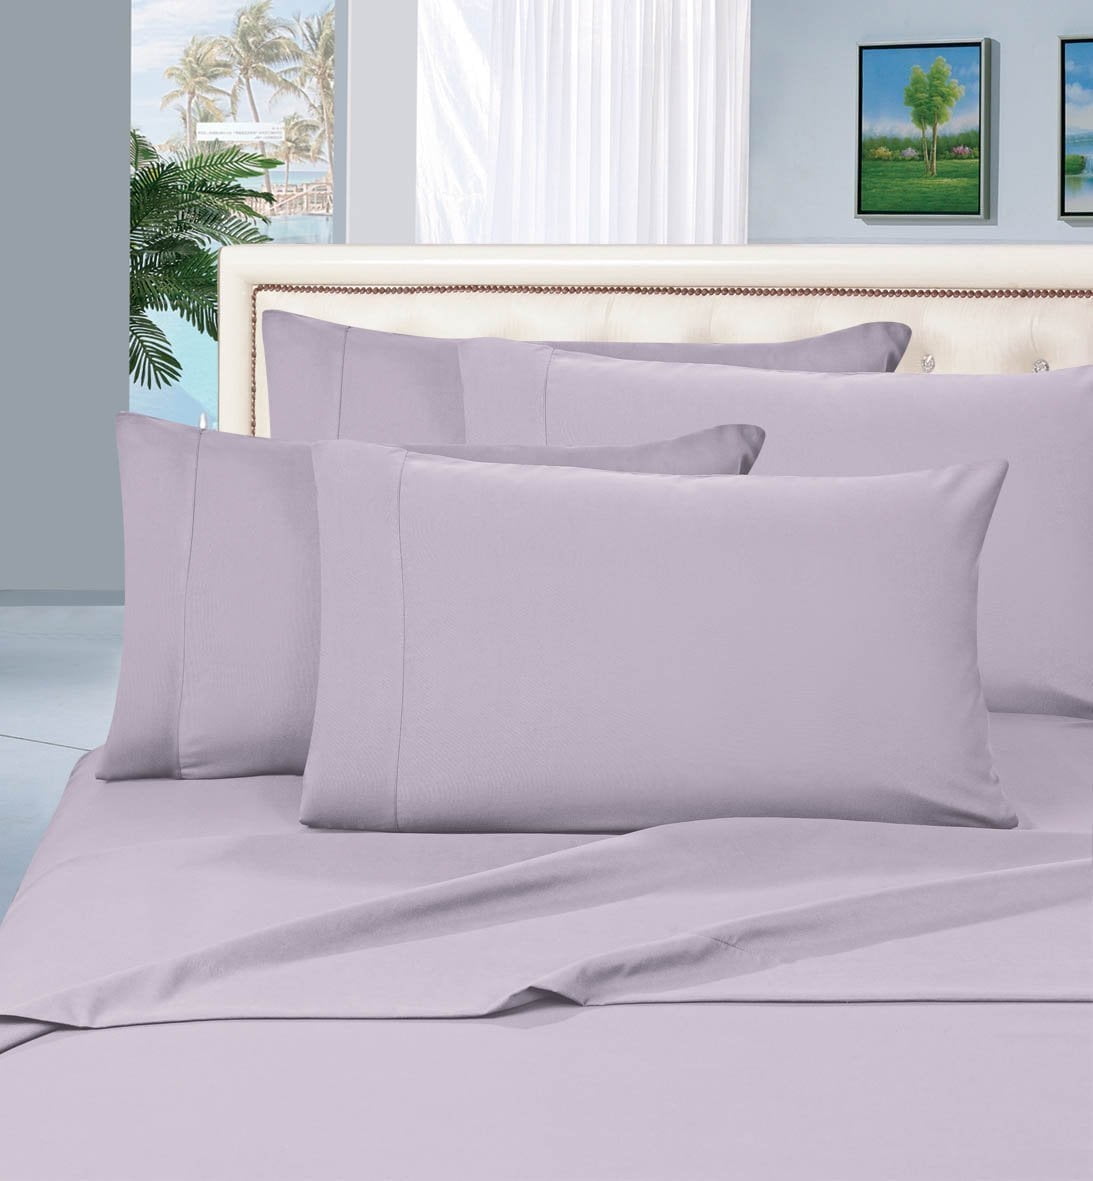 1800 Series 4-Piece Bed Sheet Set, Deep Pocket up to 16 inch